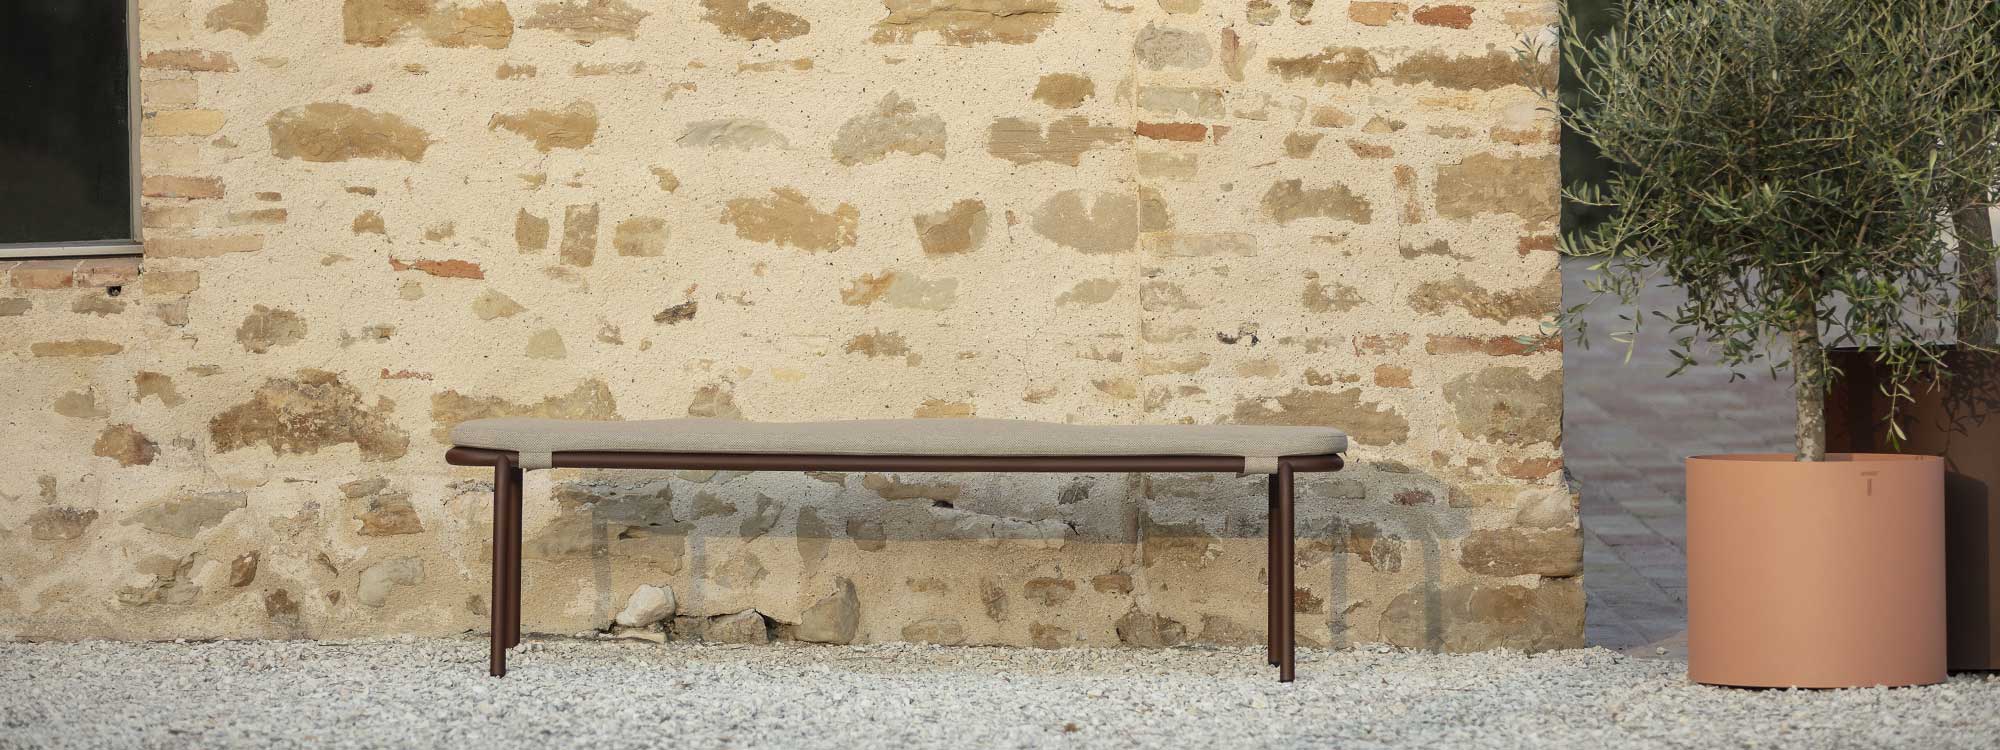 Image of rust-brown colored Starling garden bench with taupe seat cushion, shown on gravel against stone wall